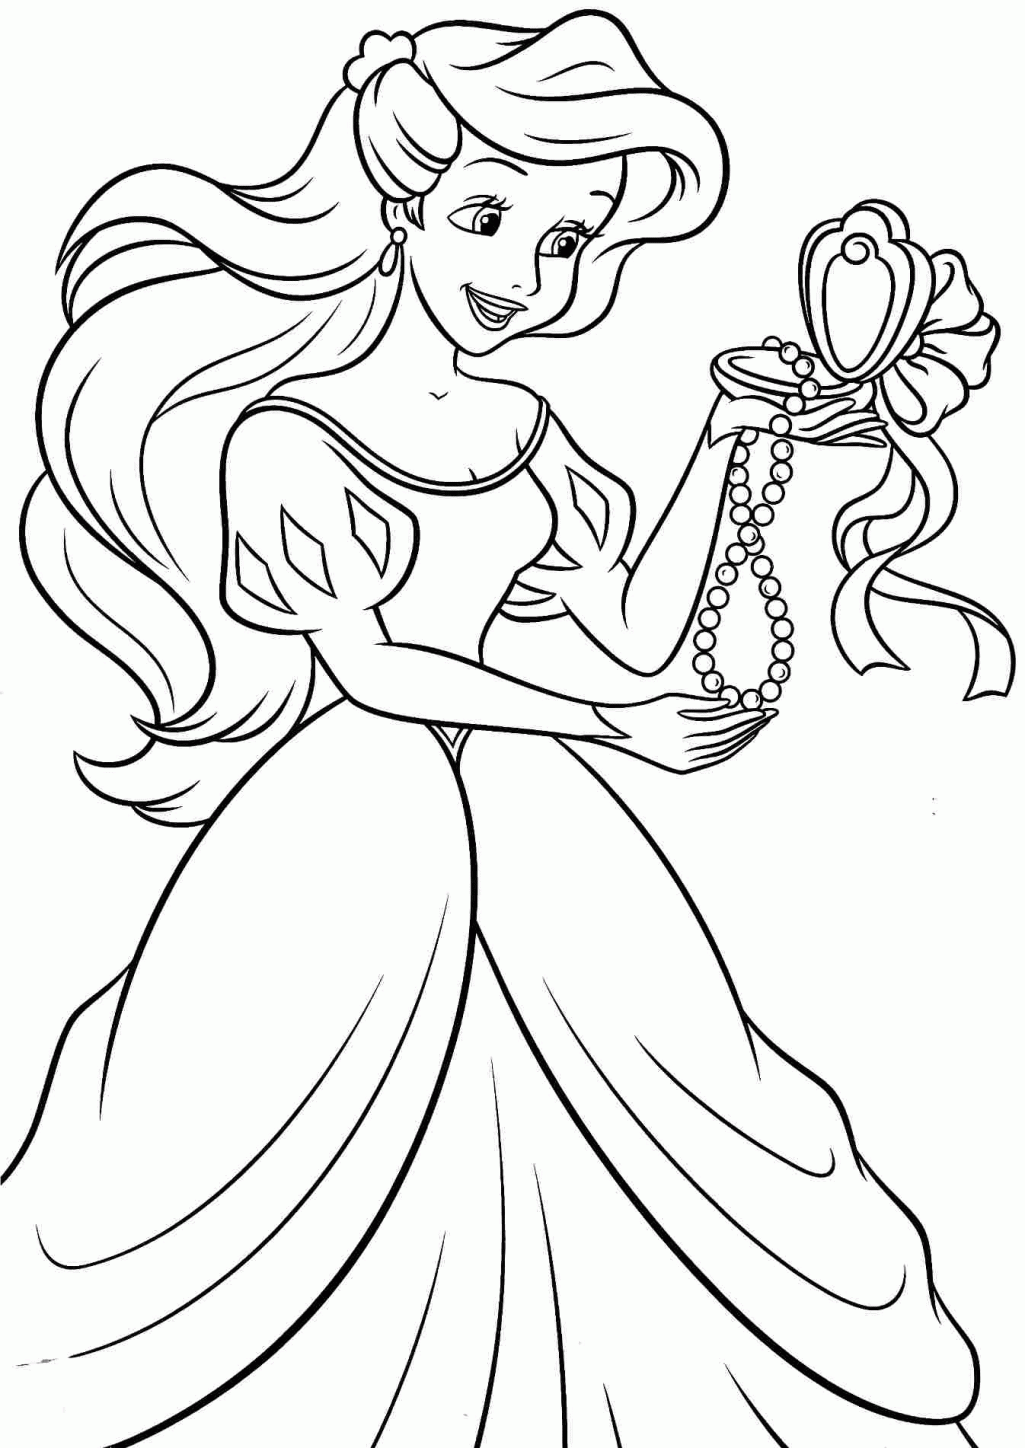 Free Coloring Sheets Coloring Pages Disney Princess Ariel For Kids ...